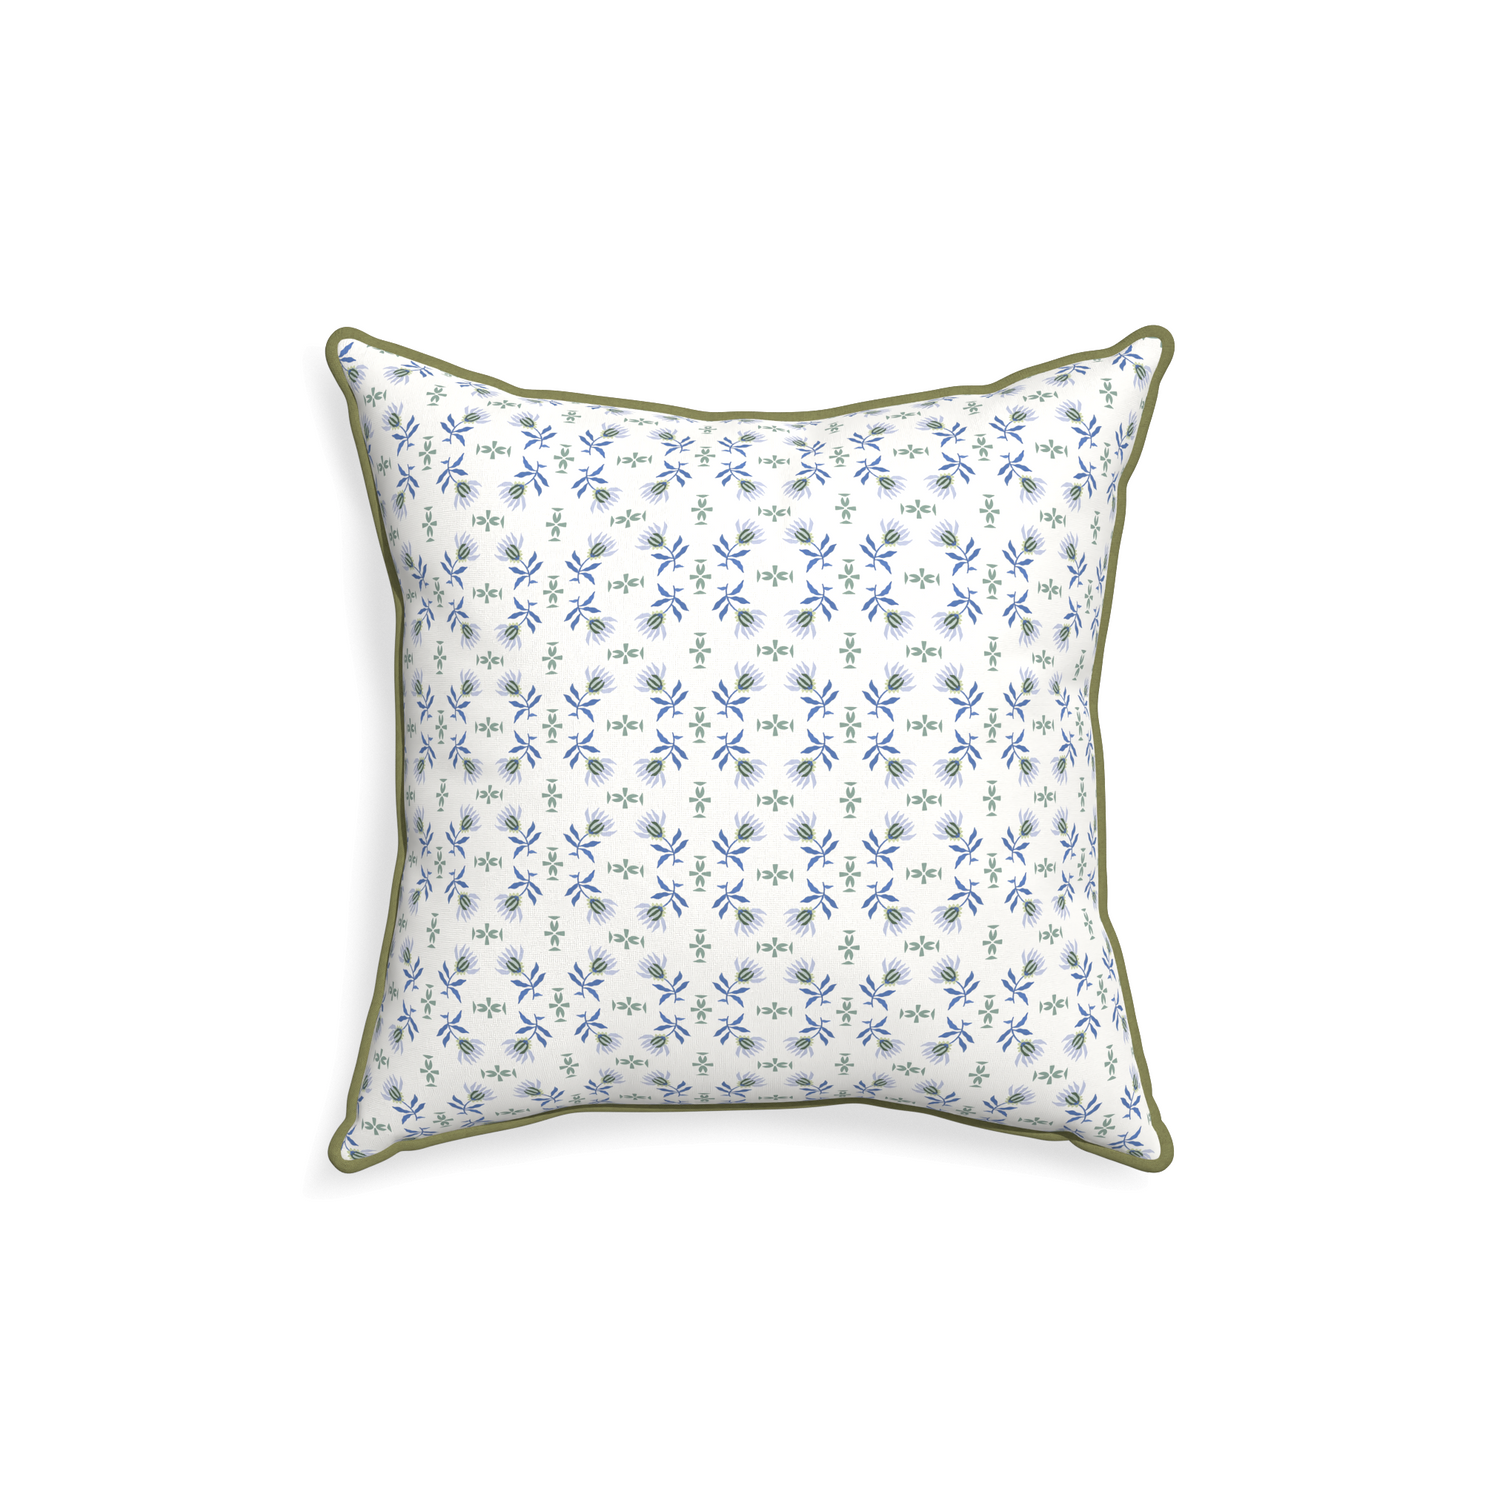 18-square lee custom pillow with moss piping on white background